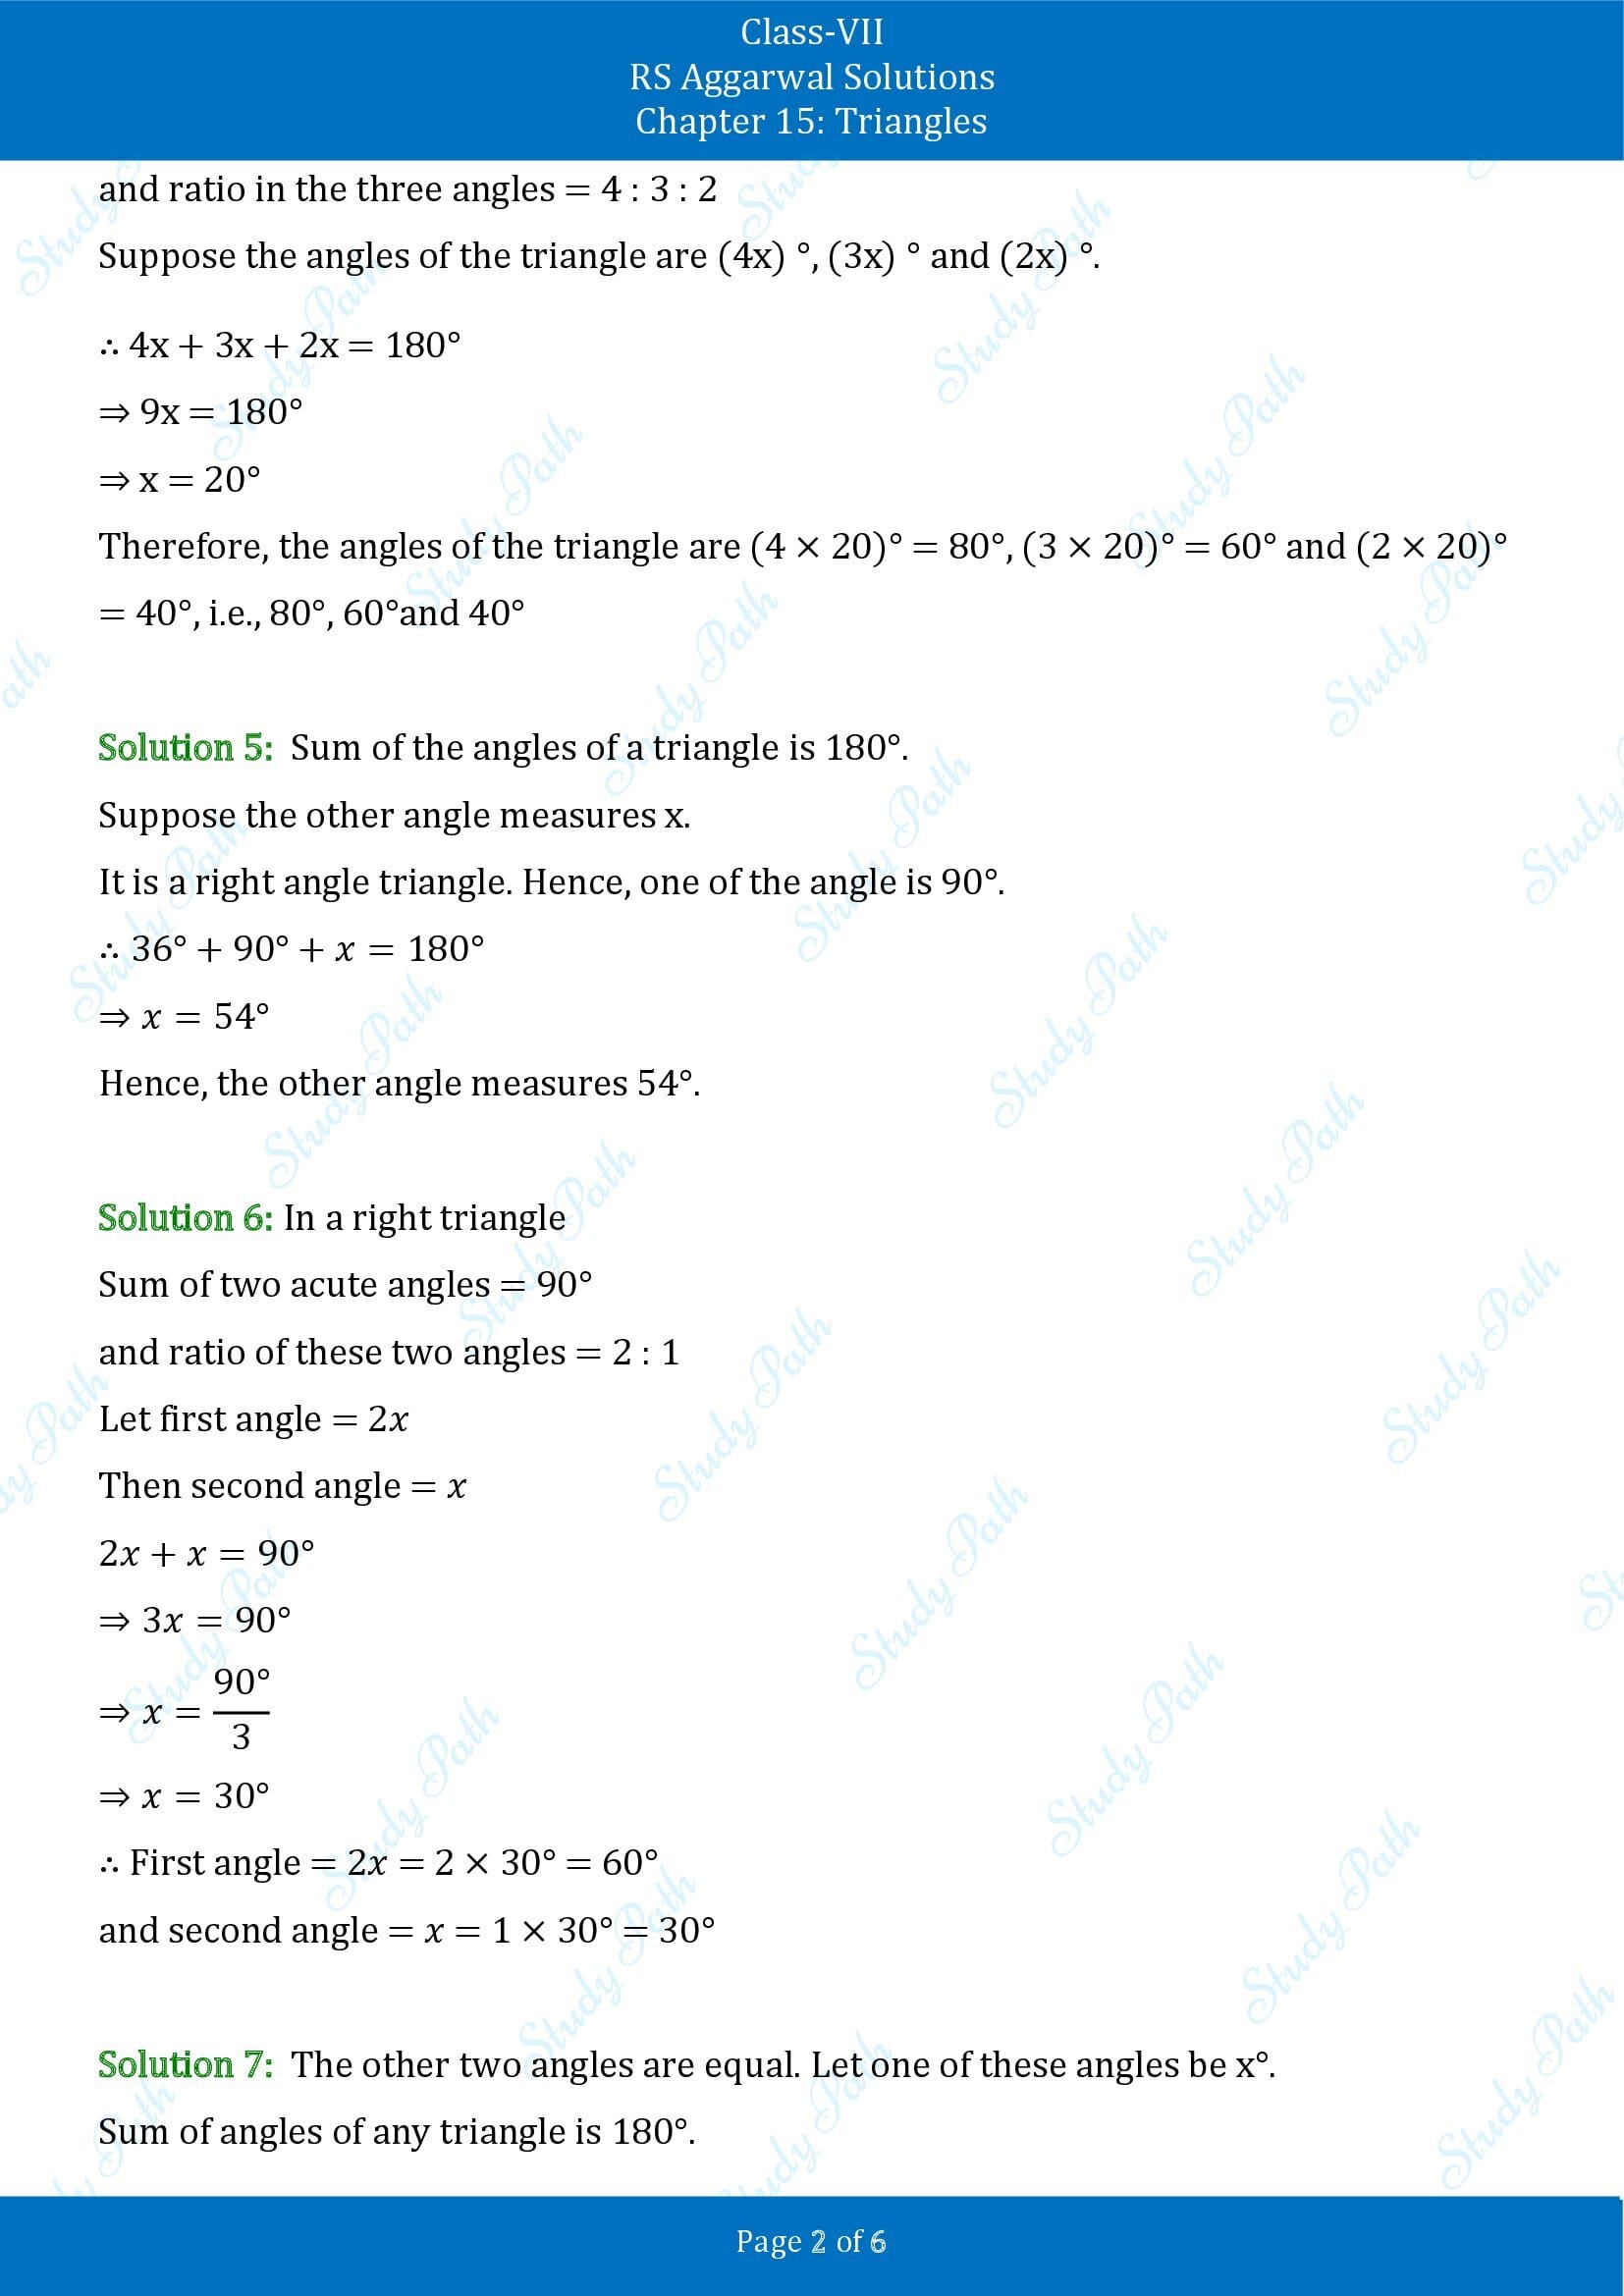 RS Aggarwal Solutions Class 7 Chapter 15 Triangles Exercise 15A 00002